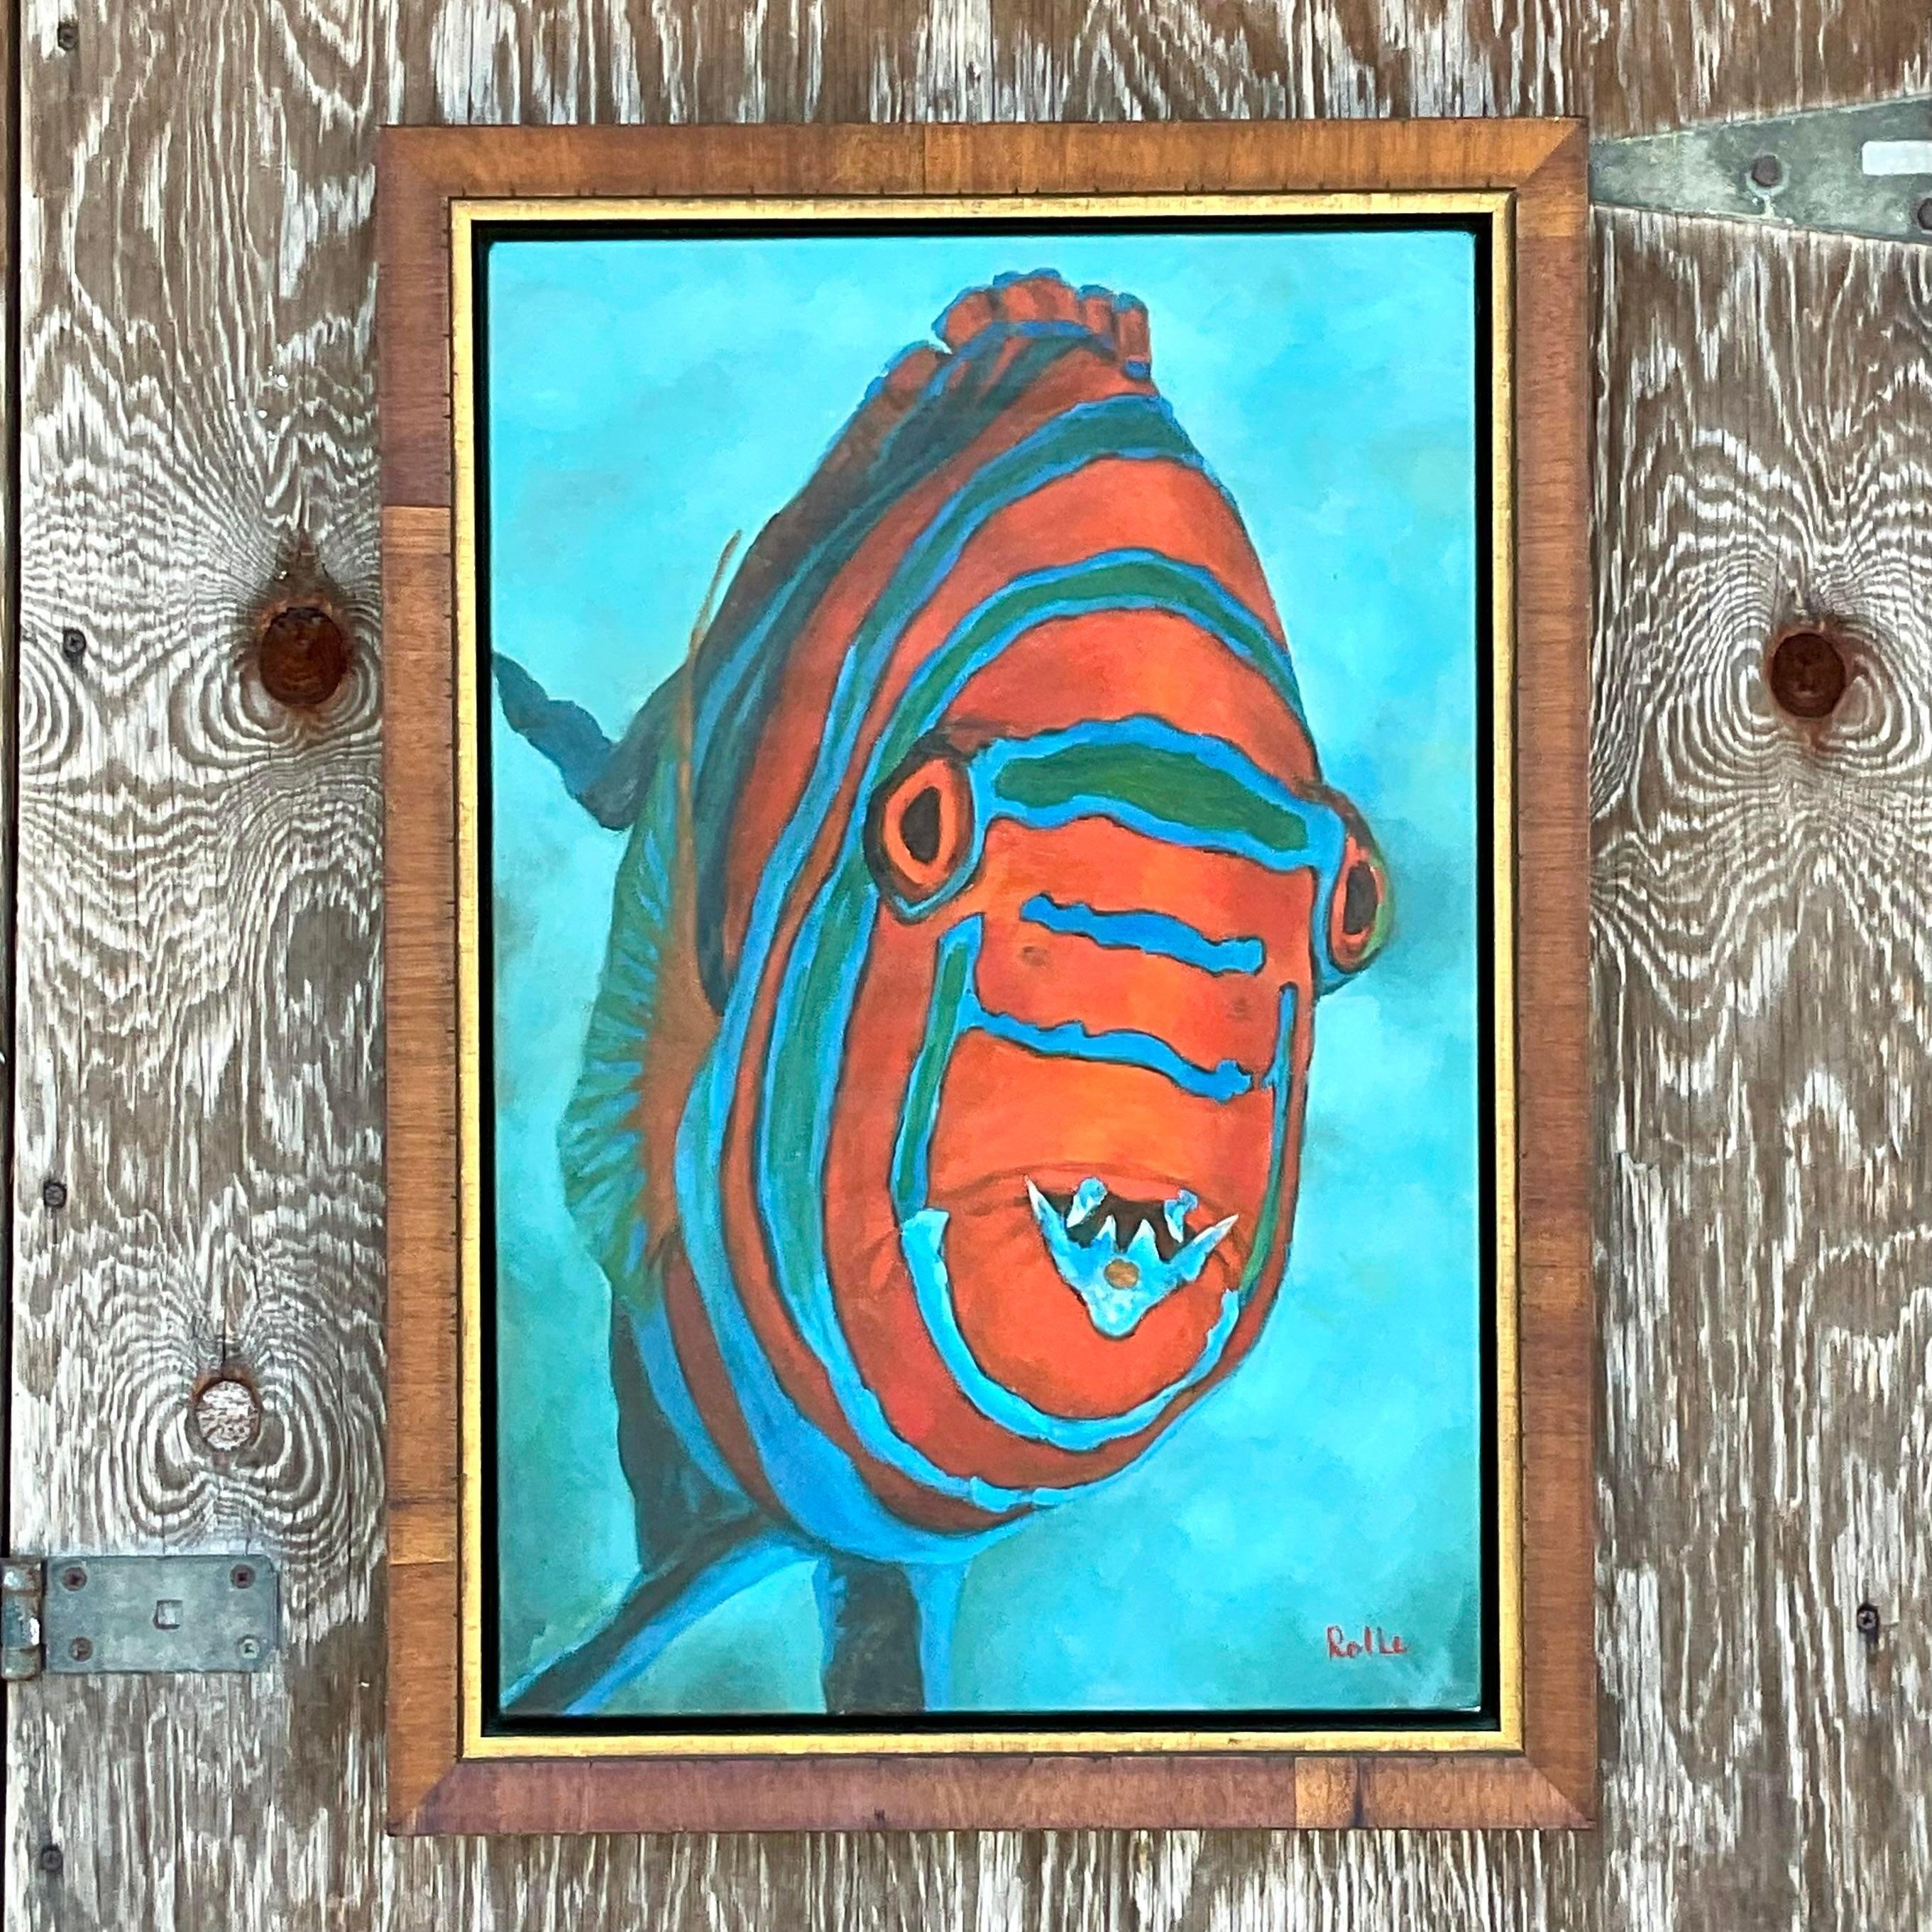 A fabulous vintage Coastal framed aboriginal oil painting. Signed by the artist. A brightly colored composition of a fish. Acquired from a Palm Beach estate